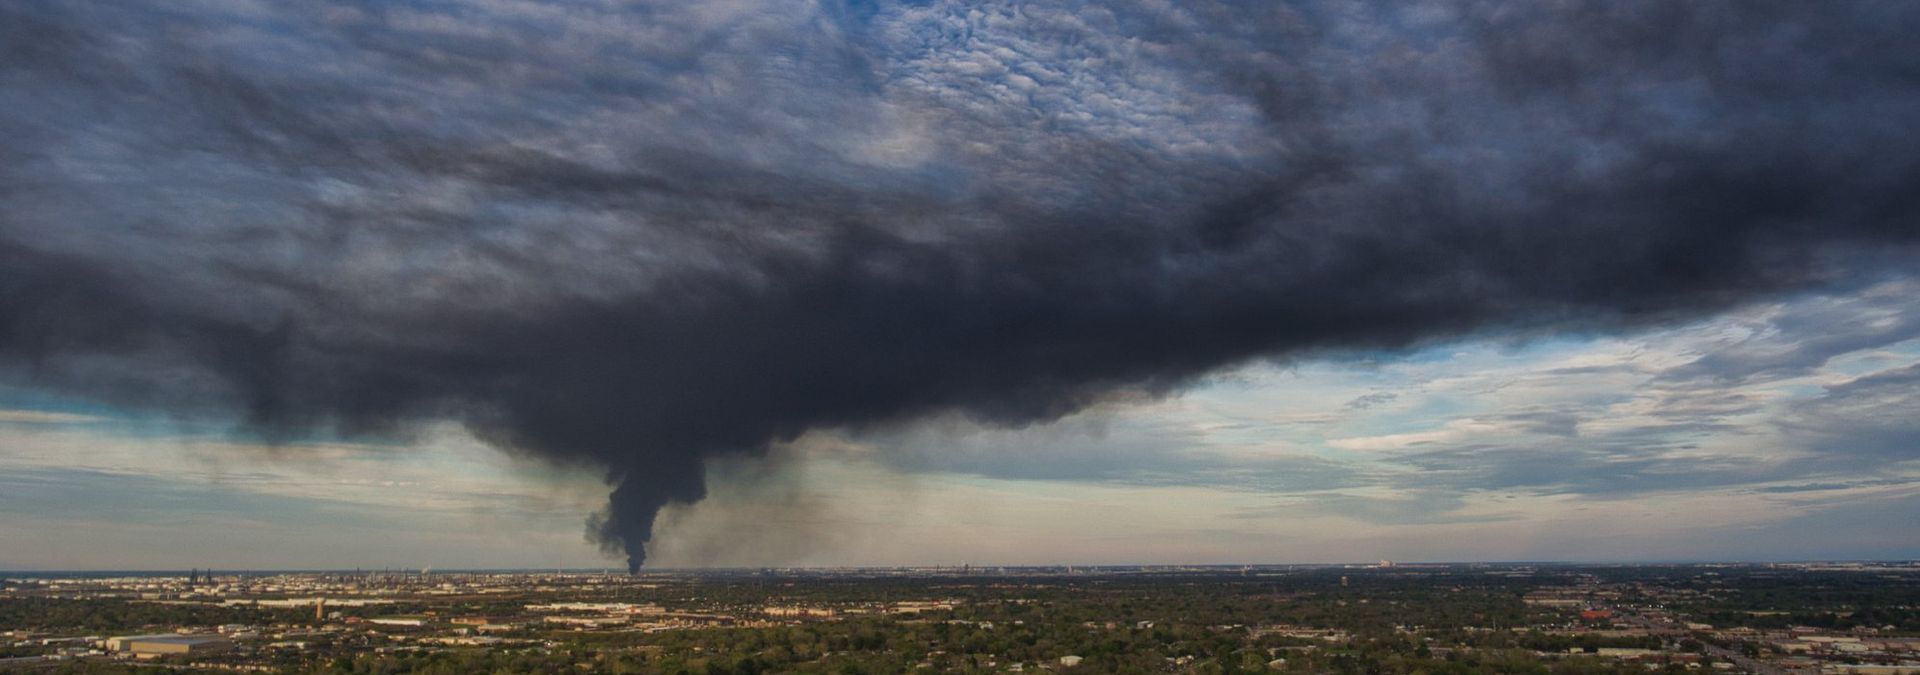 The Houston region has gone through at least six major chemical disasters in the past year.